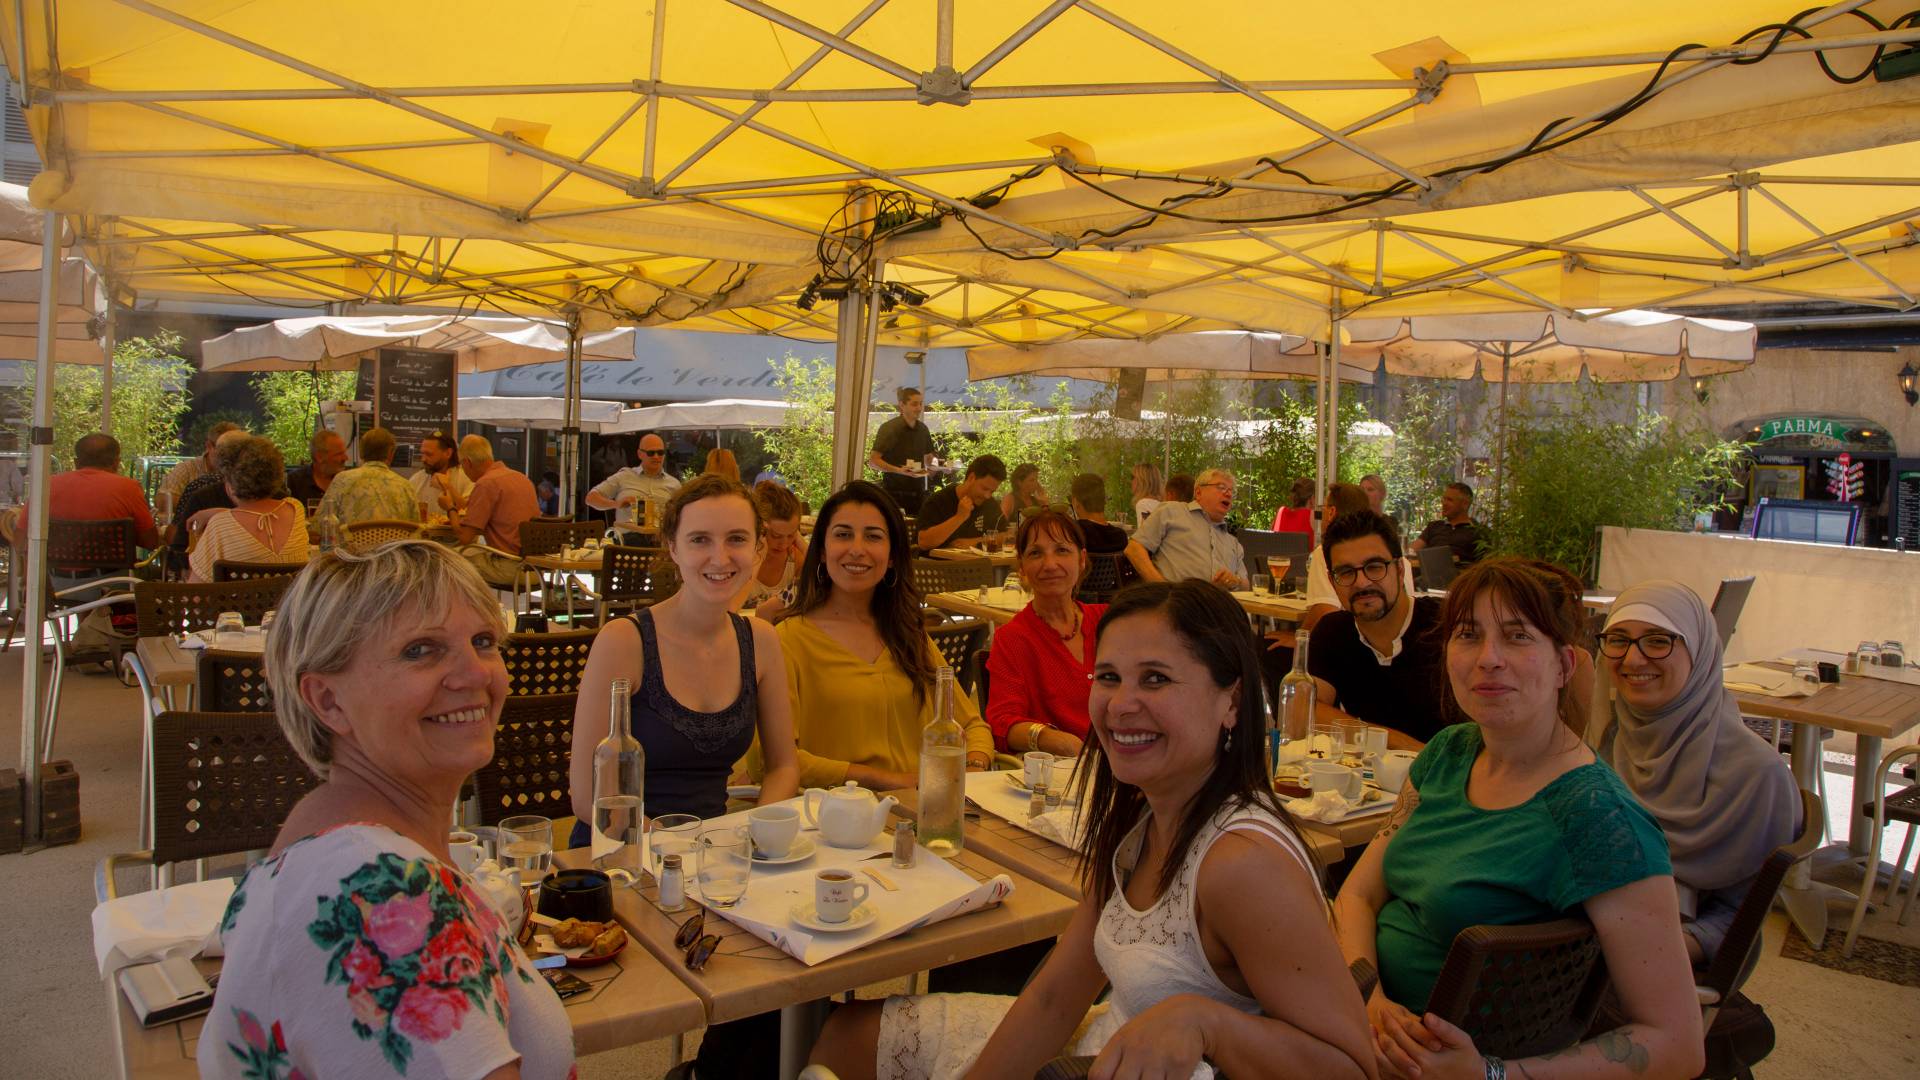 Faculty and graduate students sitting in outdoor cafe in France